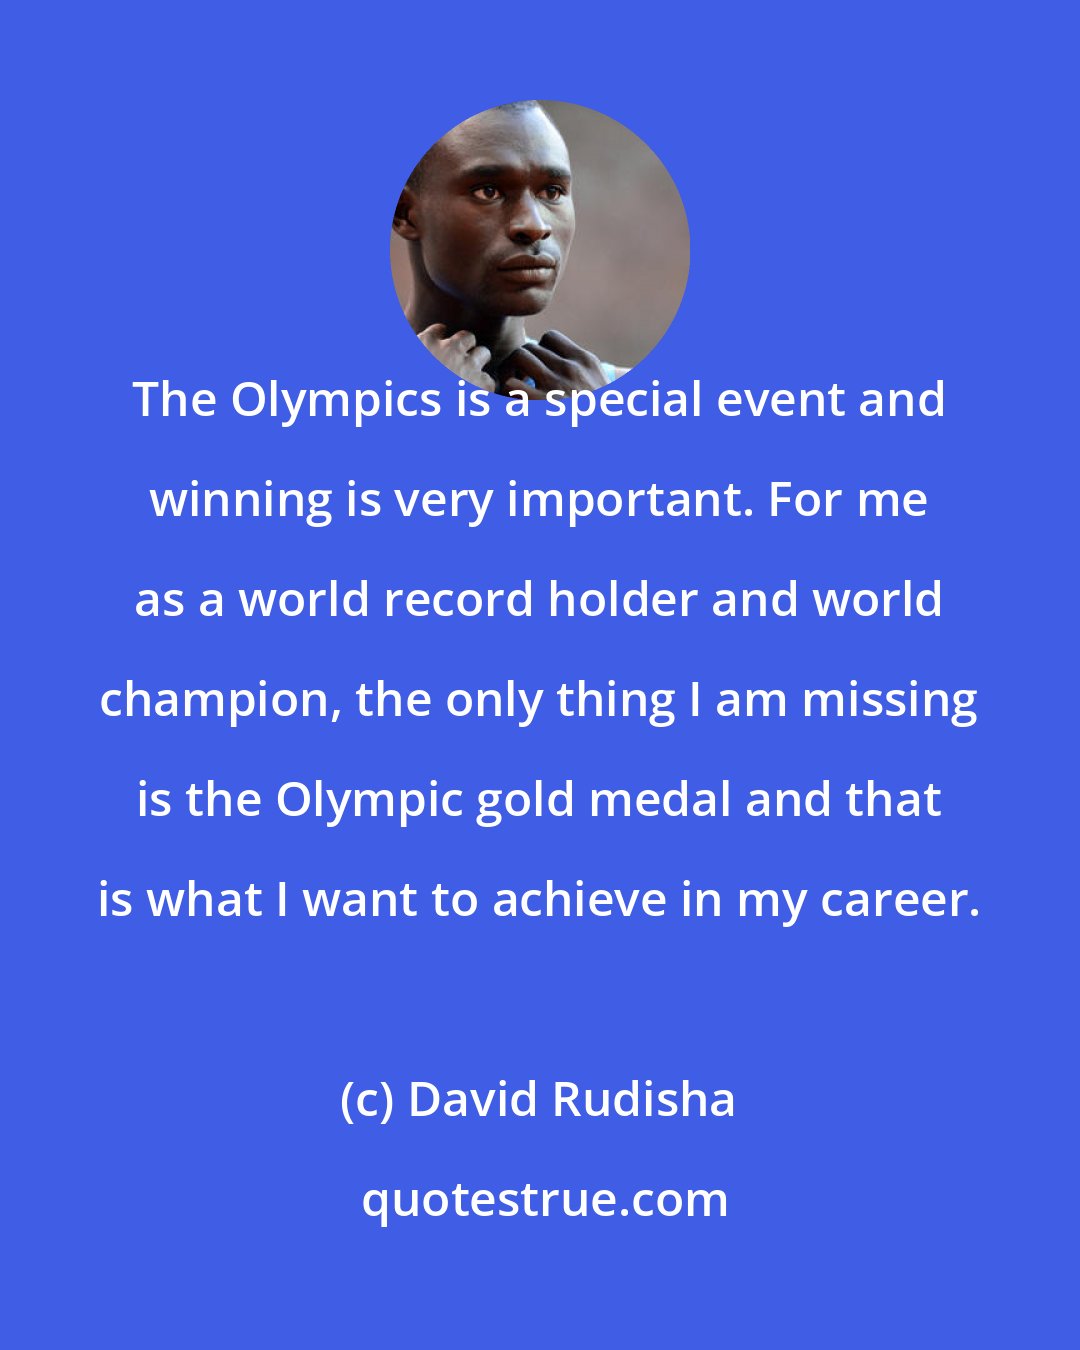 David Rudisha: The Olympics is a special event and winning is very important. For me as a world record holder and world champion, the only thing I am missing is the Olympic gold medal and that is what I want to achieve in my career.